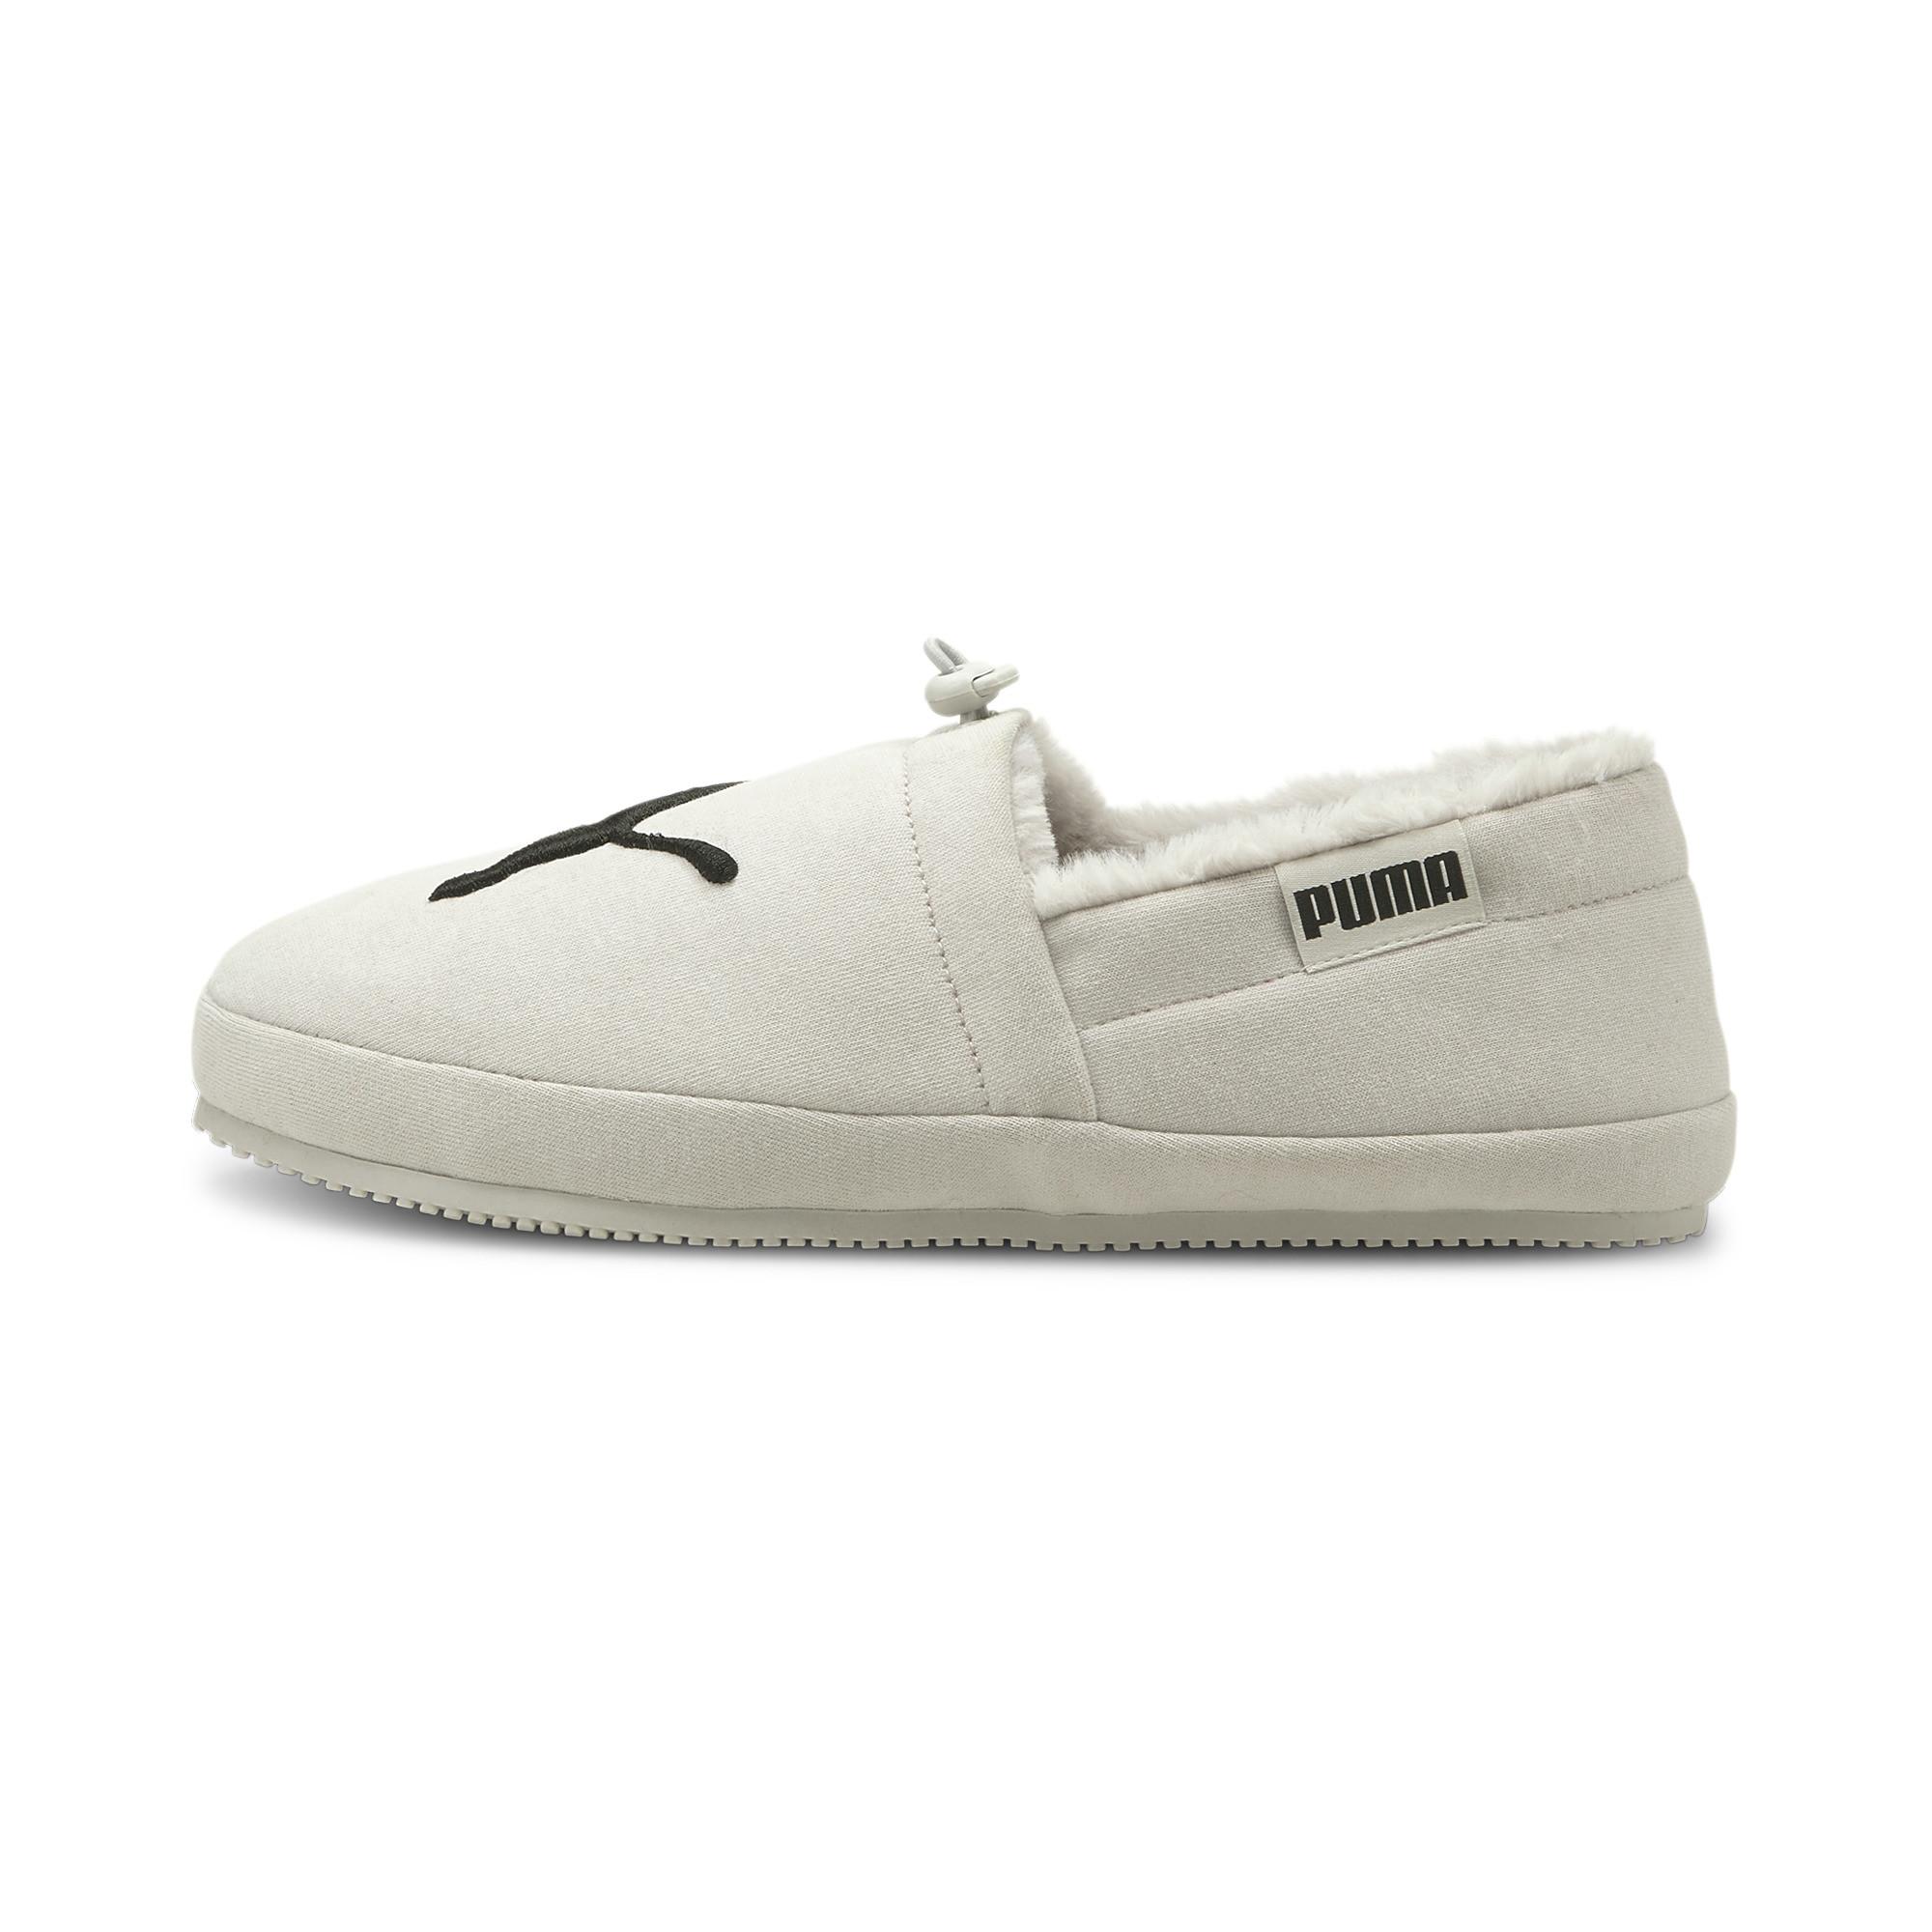 PUMA Fur Tuff Mocc Cat Slippers Shoes in White for Men - Lyst